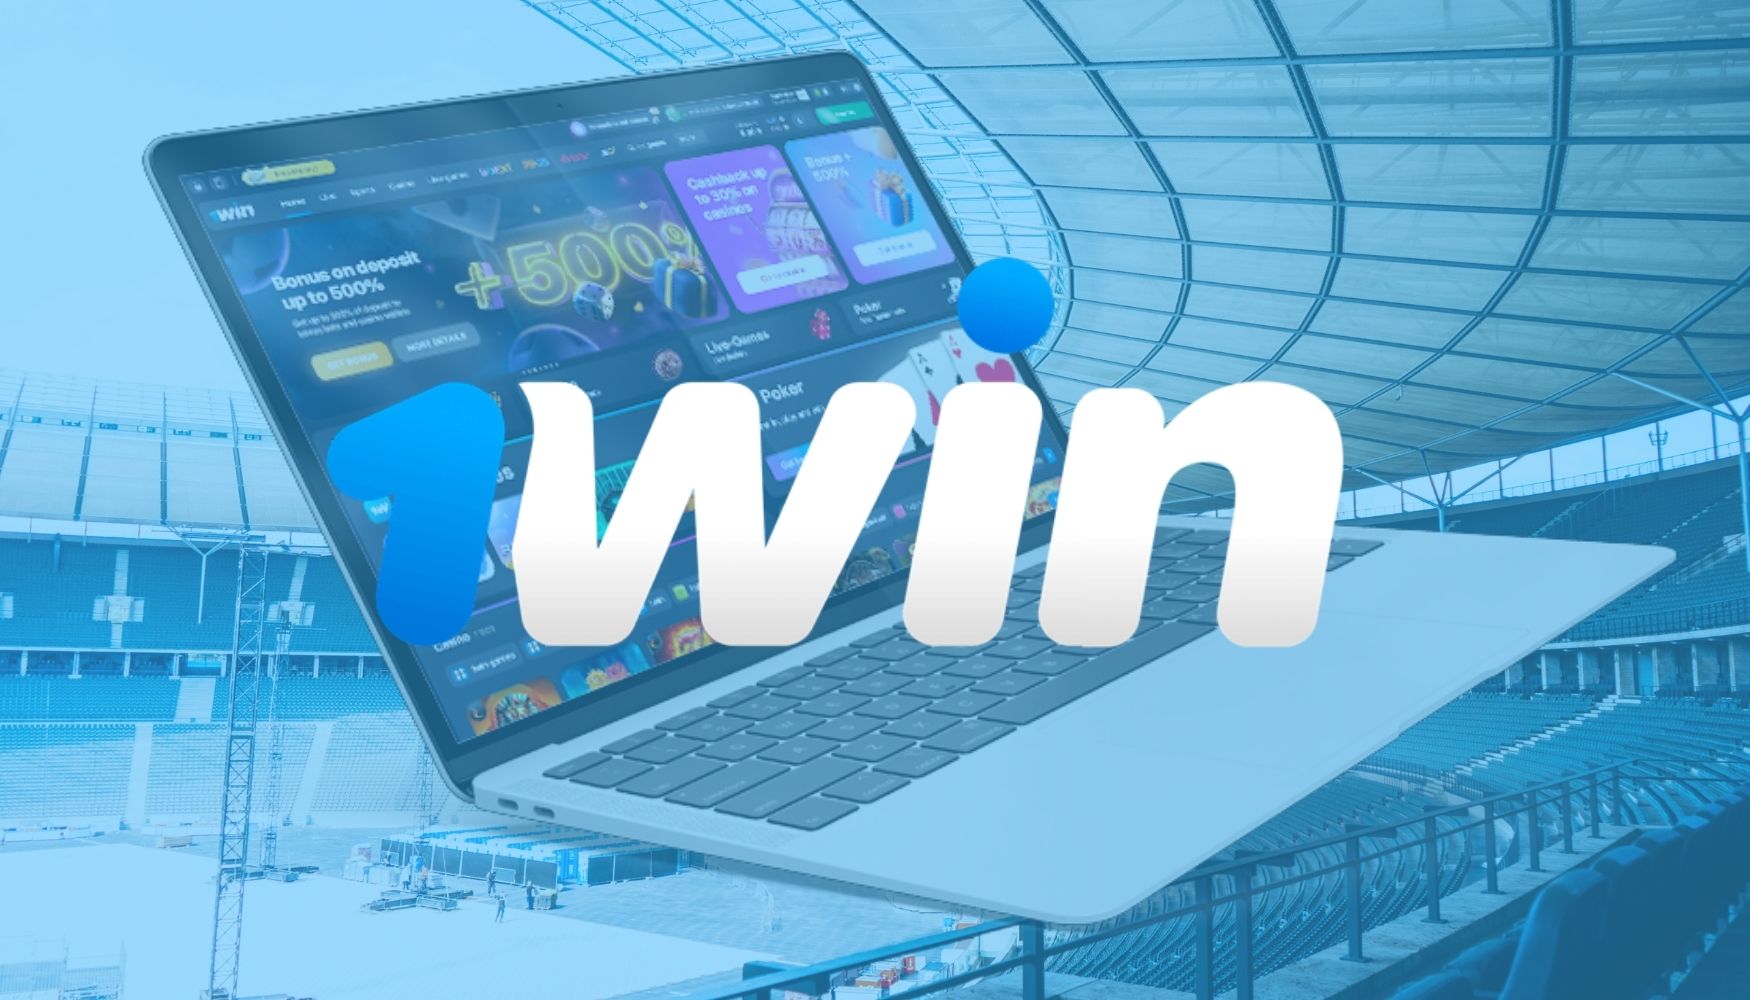 1win official website for betting overview